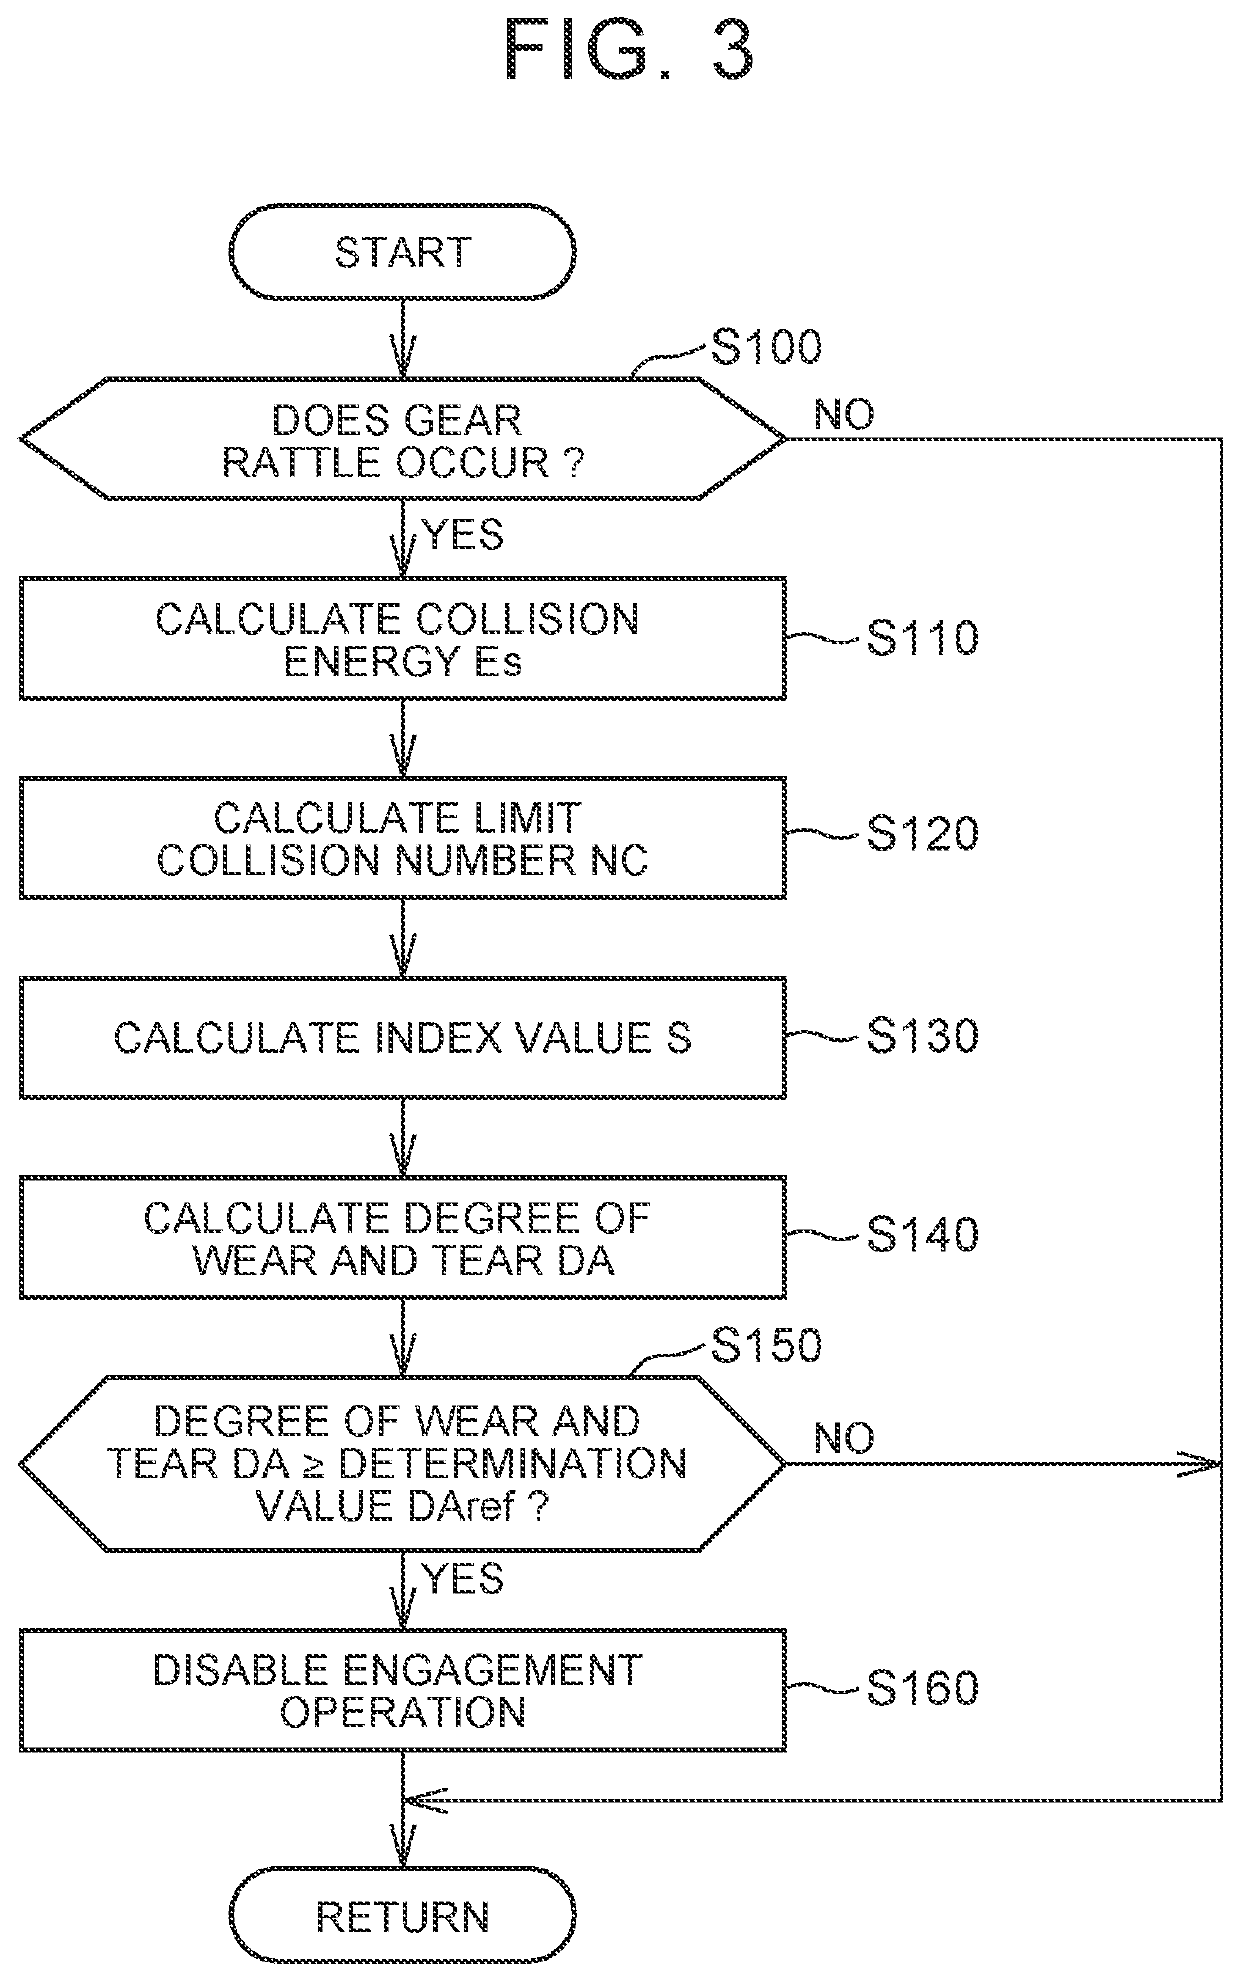 In-vehicle control apparatus